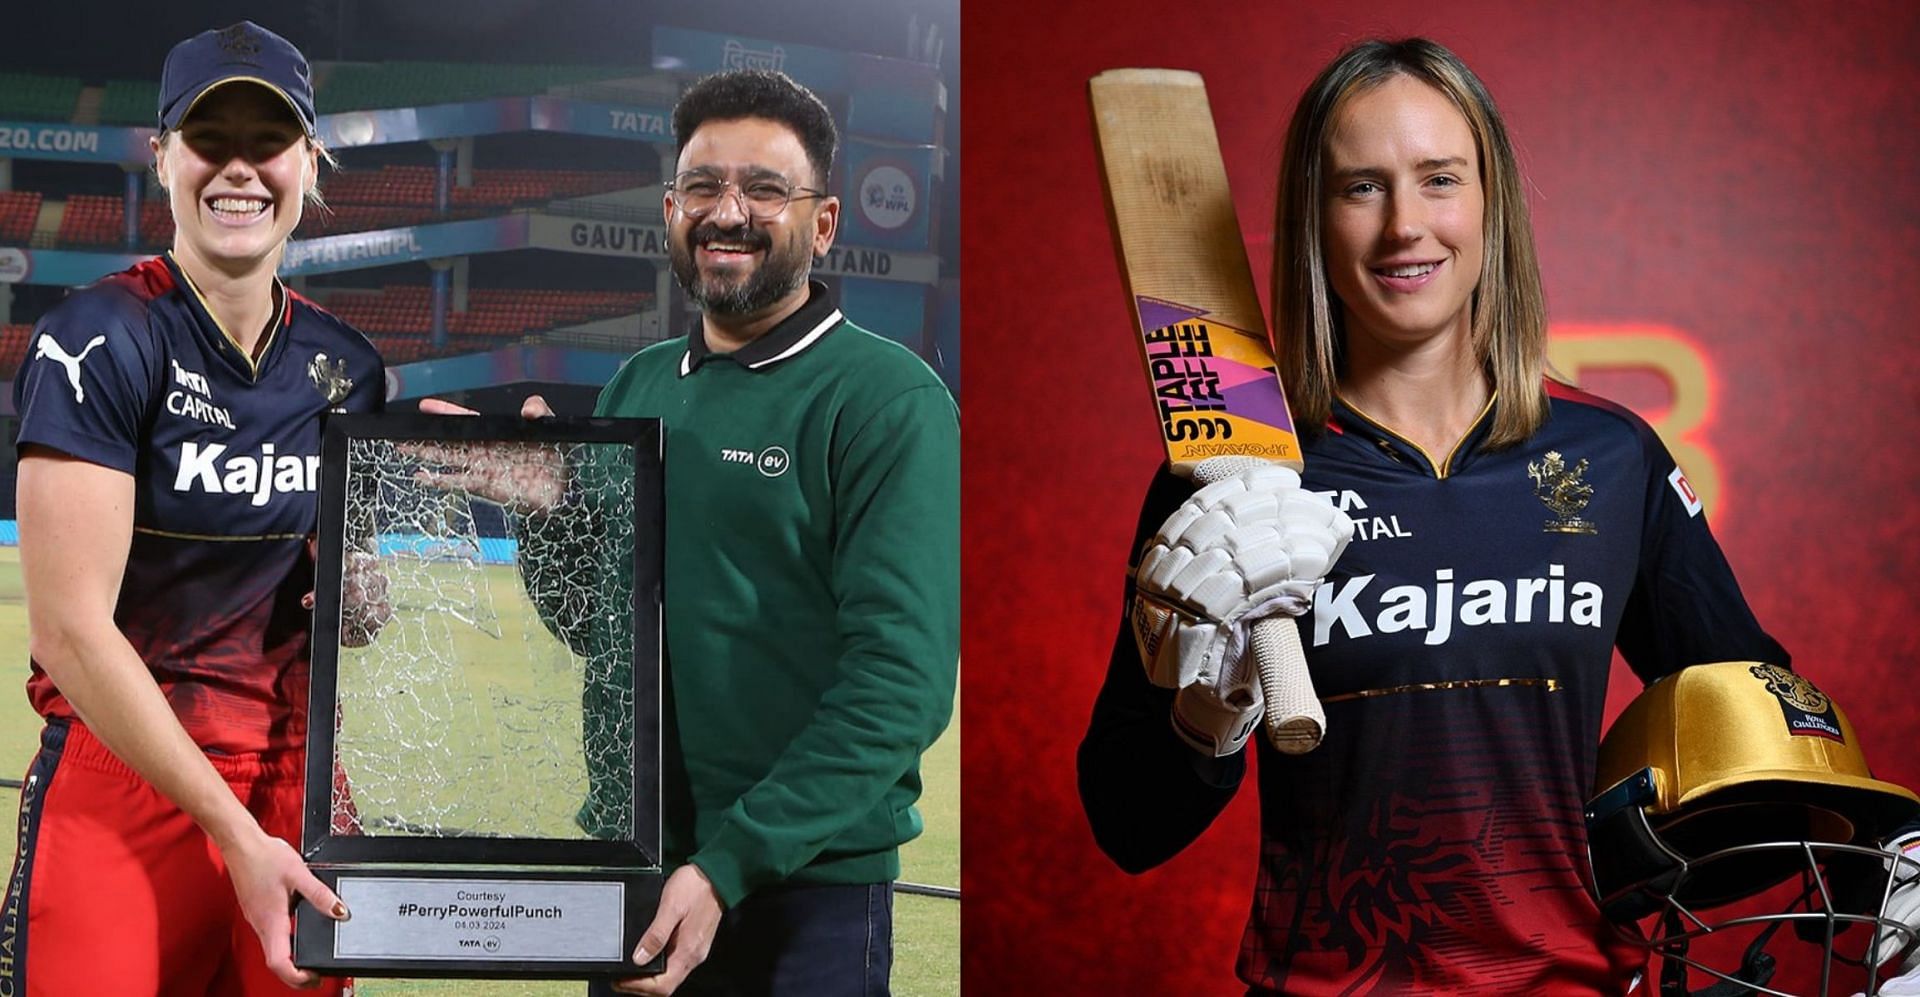 Royal Challengers Bangalore (RCB) all-rounder Ellyse Perry was on Friday presented with a broken glass pieces award by the WPL title sponsor TATA at the Arun Jaitley Stadium